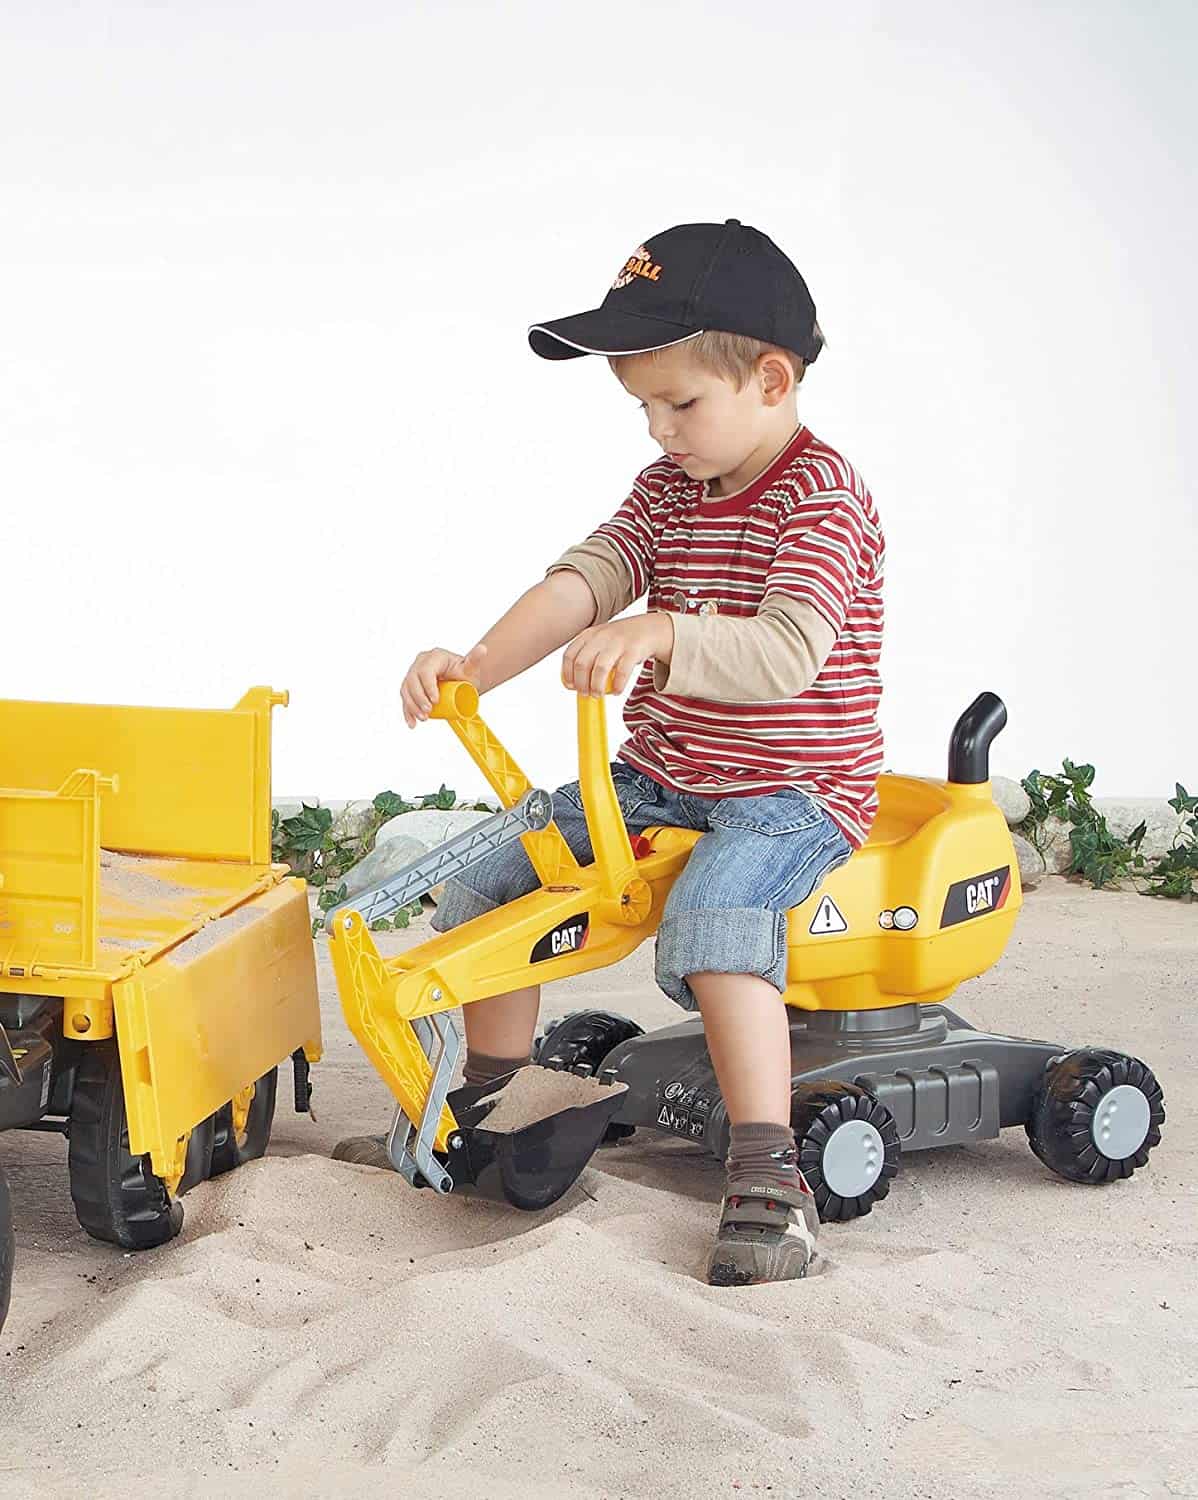 Best toy excavator you can sit on Rolly Toys Digger